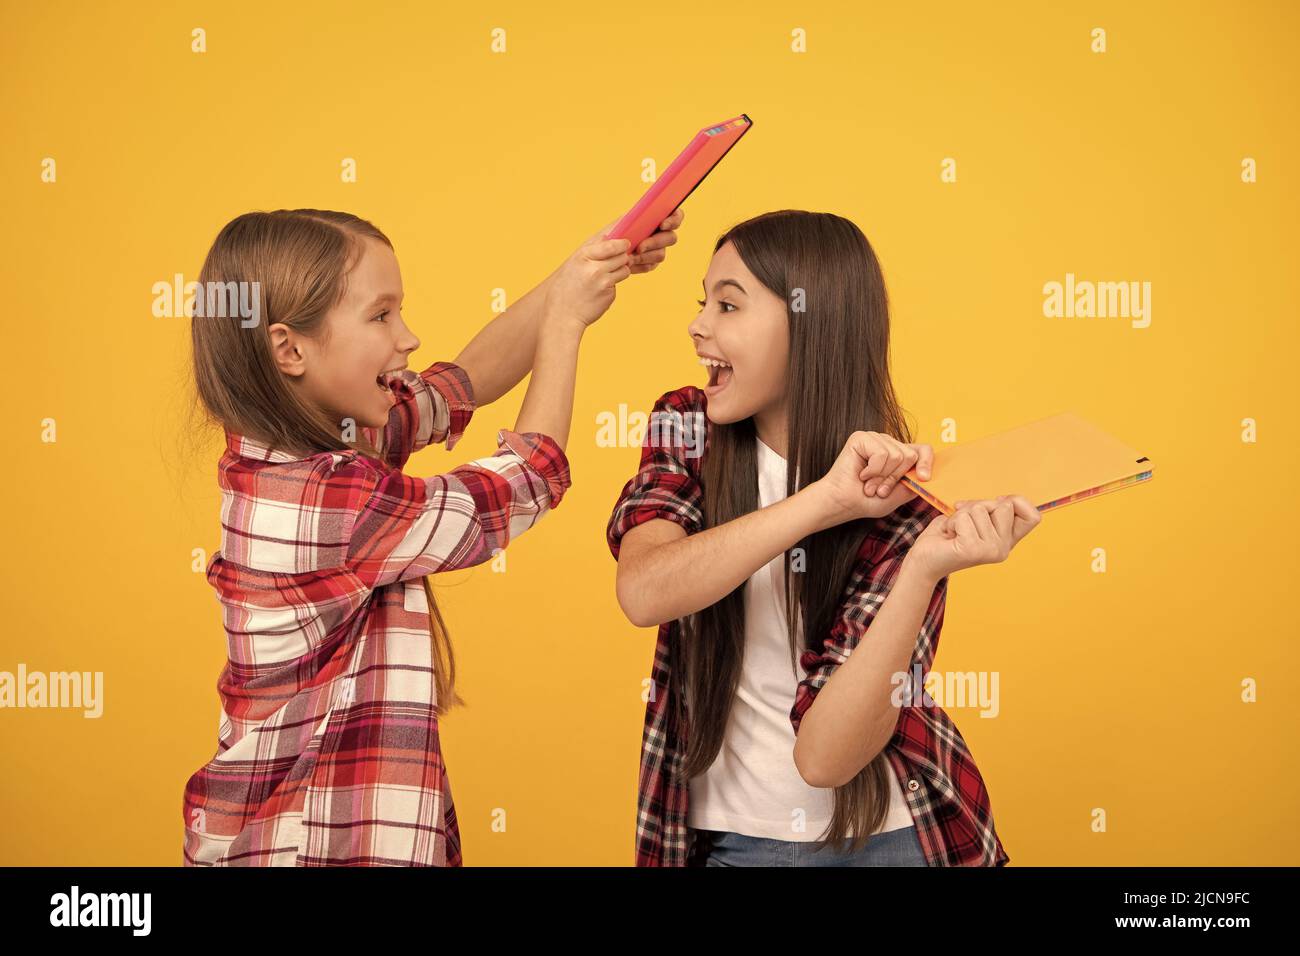 teens ready to study. happy childhood. cheerful kids going to do homework with books. Stock Photo